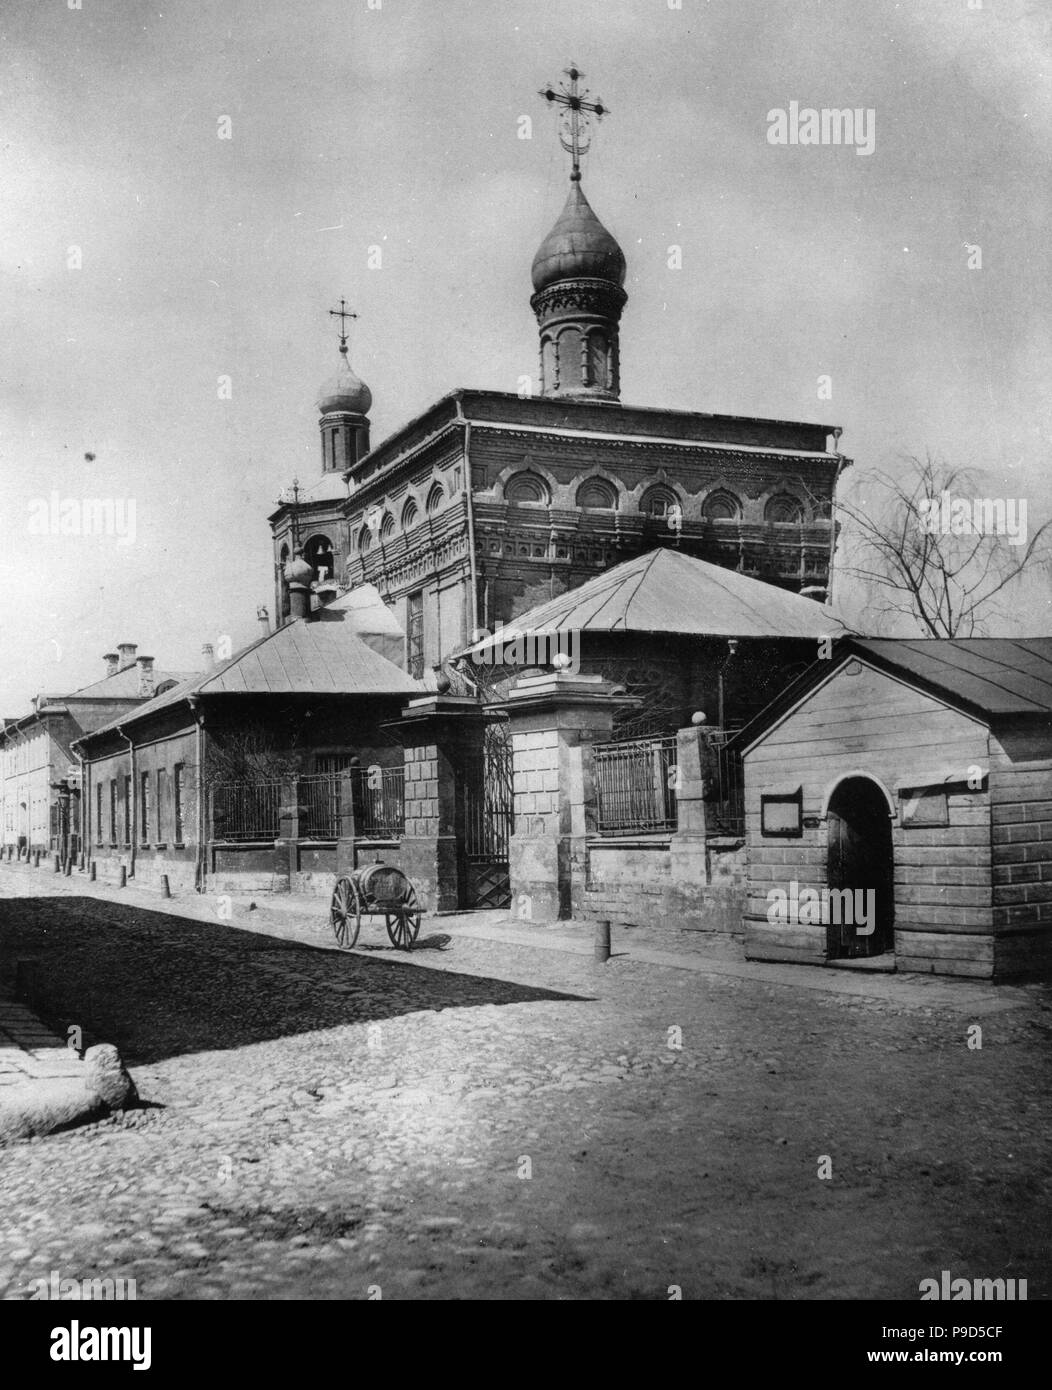 The Church of Saint Michael the Archangel on Ovchinniki in Moscow. Museum: Russian State Film and Photo Archive, Krasnogorsk. Stock Photo